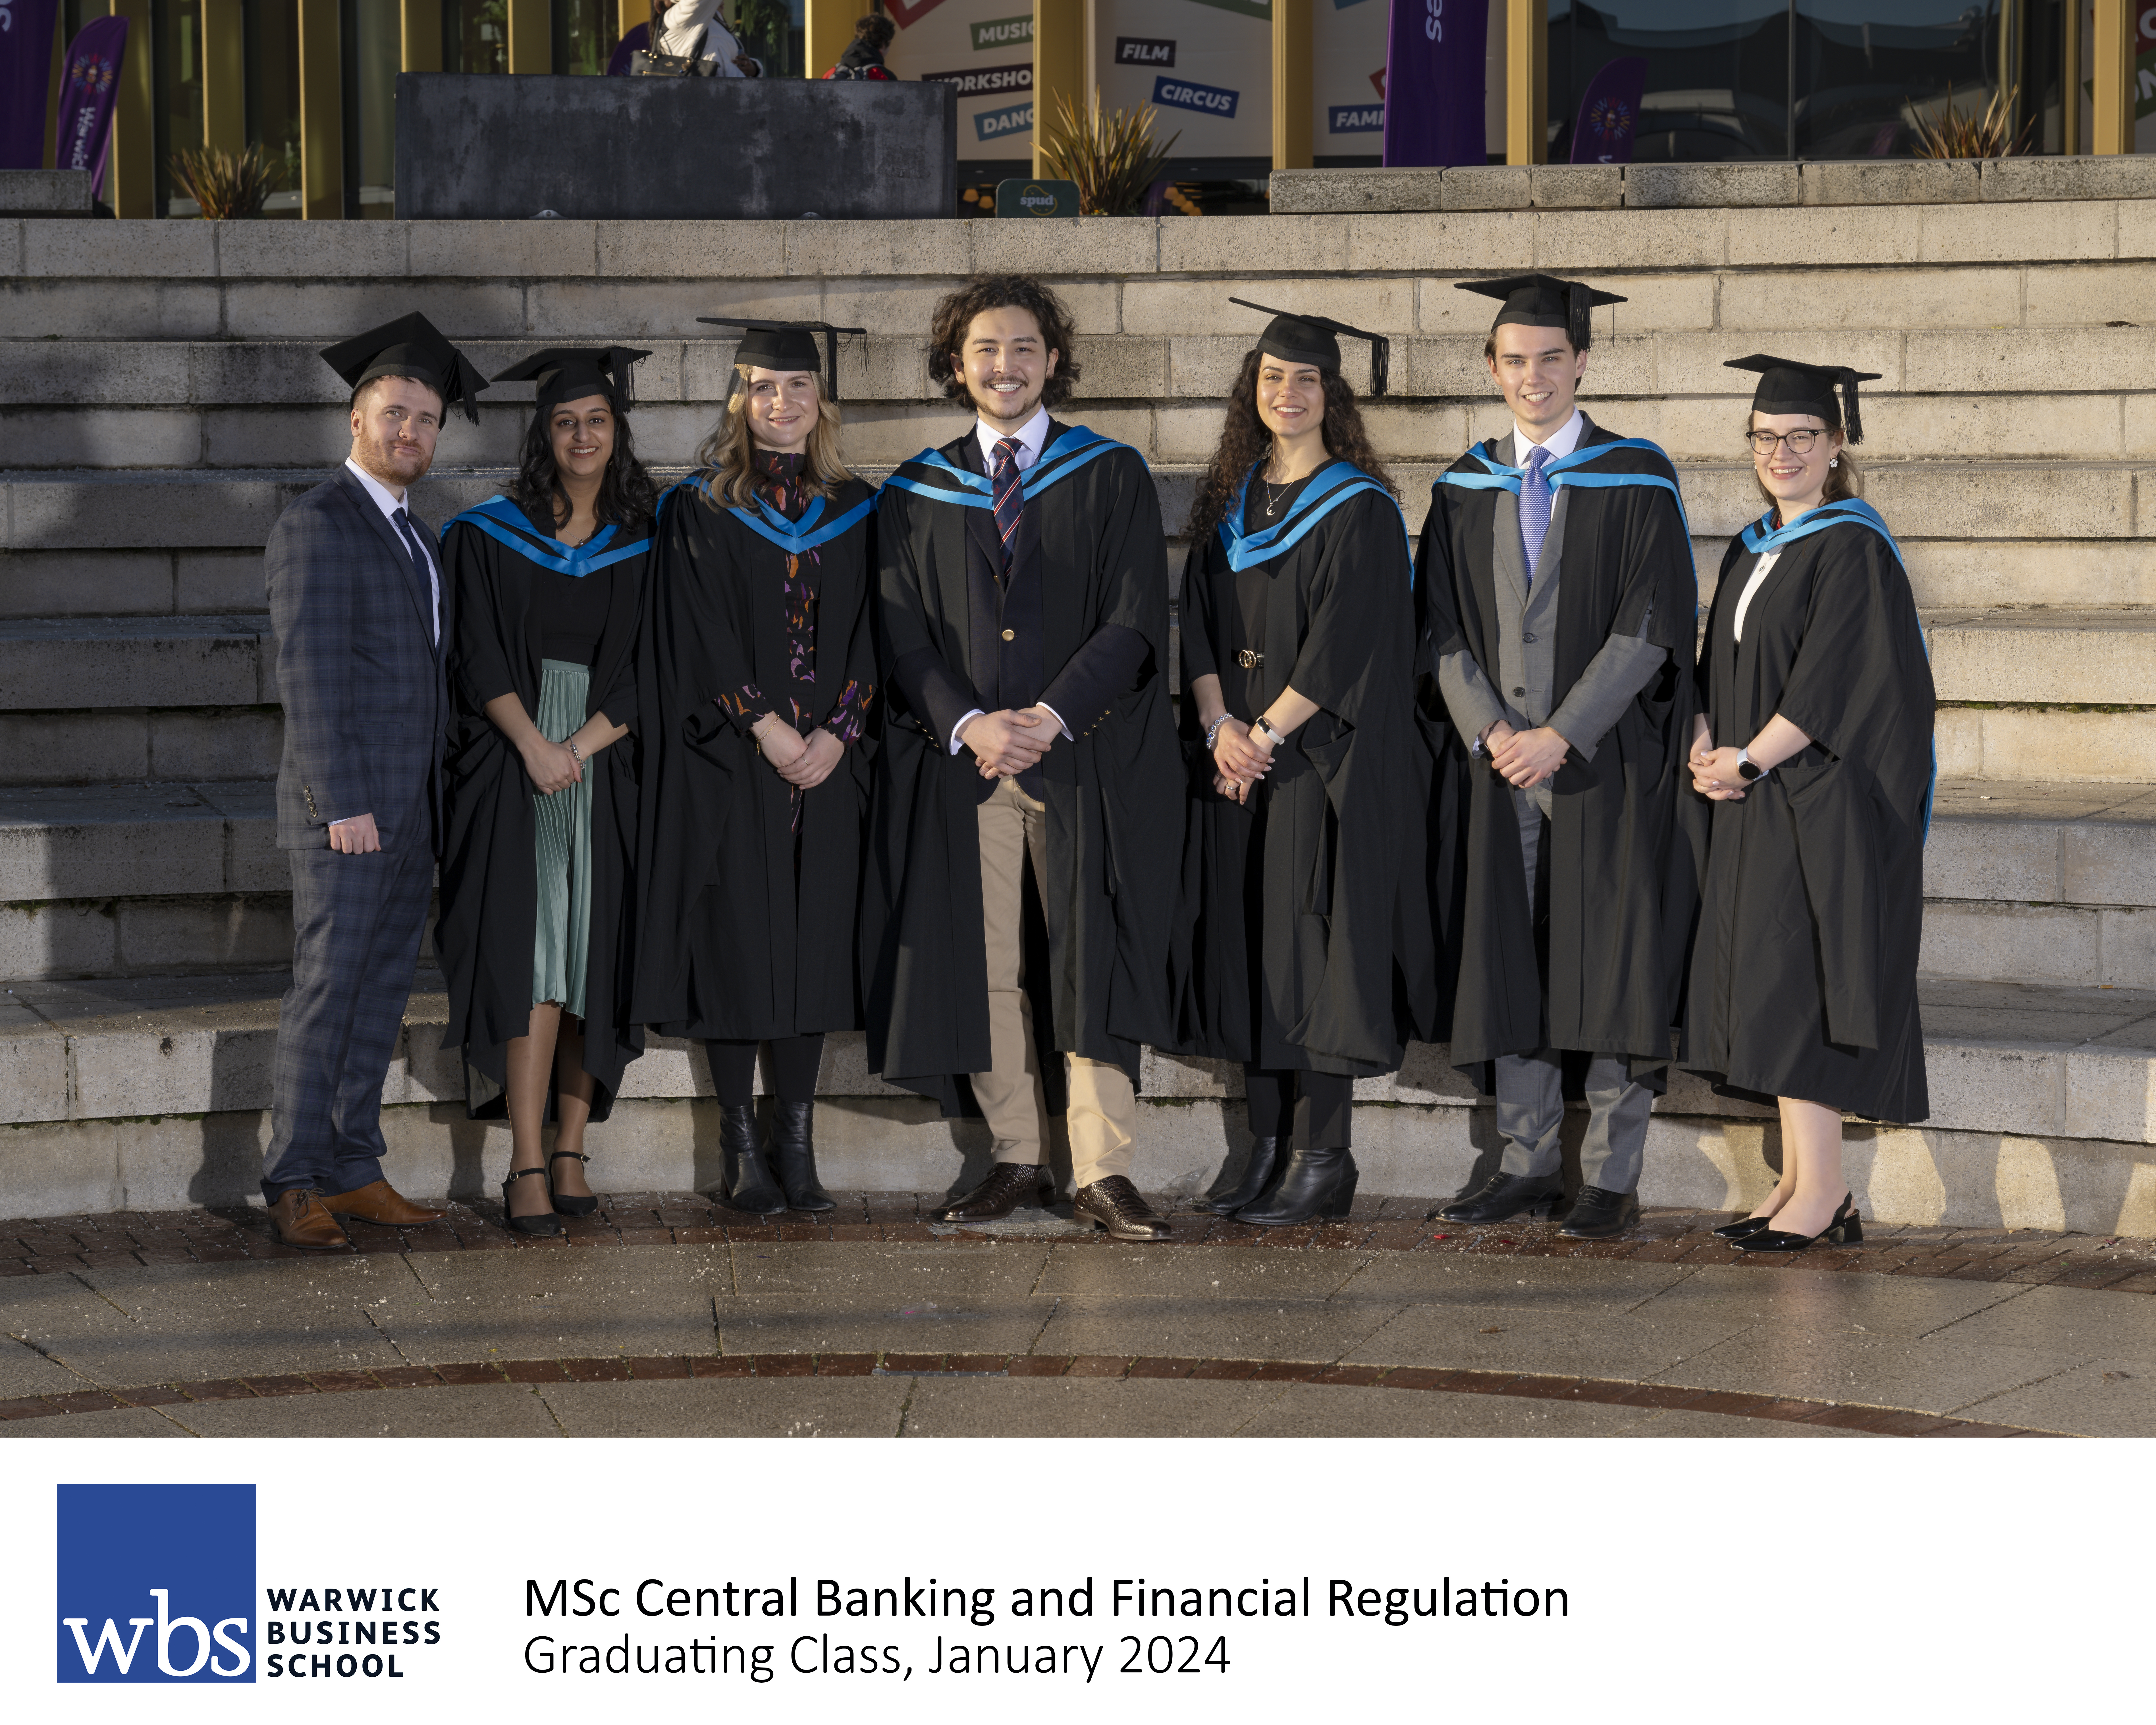 wbs_grad_jan24_-_msc_central_banking_and_financial_regulation_captioned.jpg